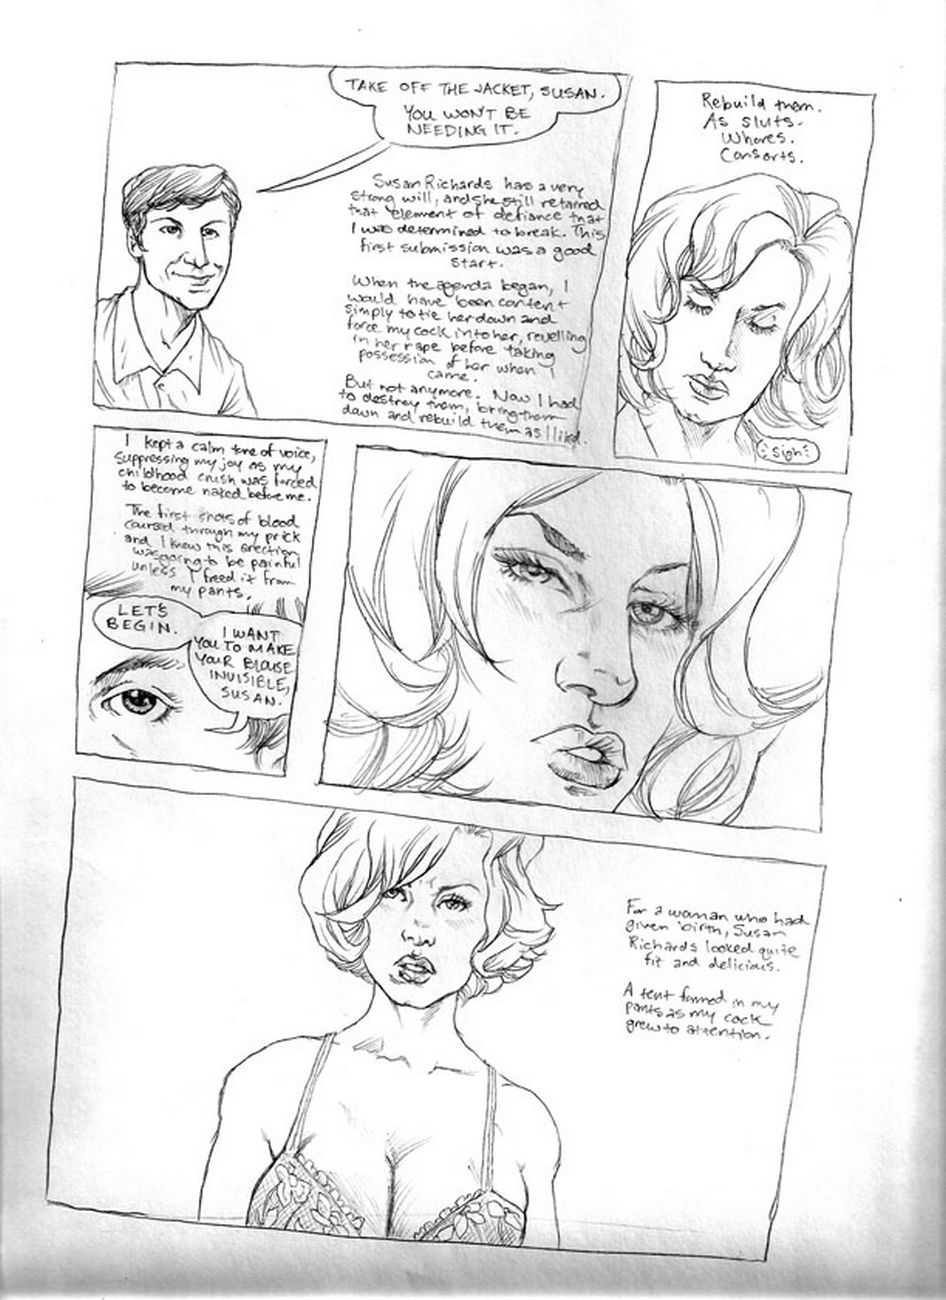 Submission Agenda 5 - The Invisible Woman page 8